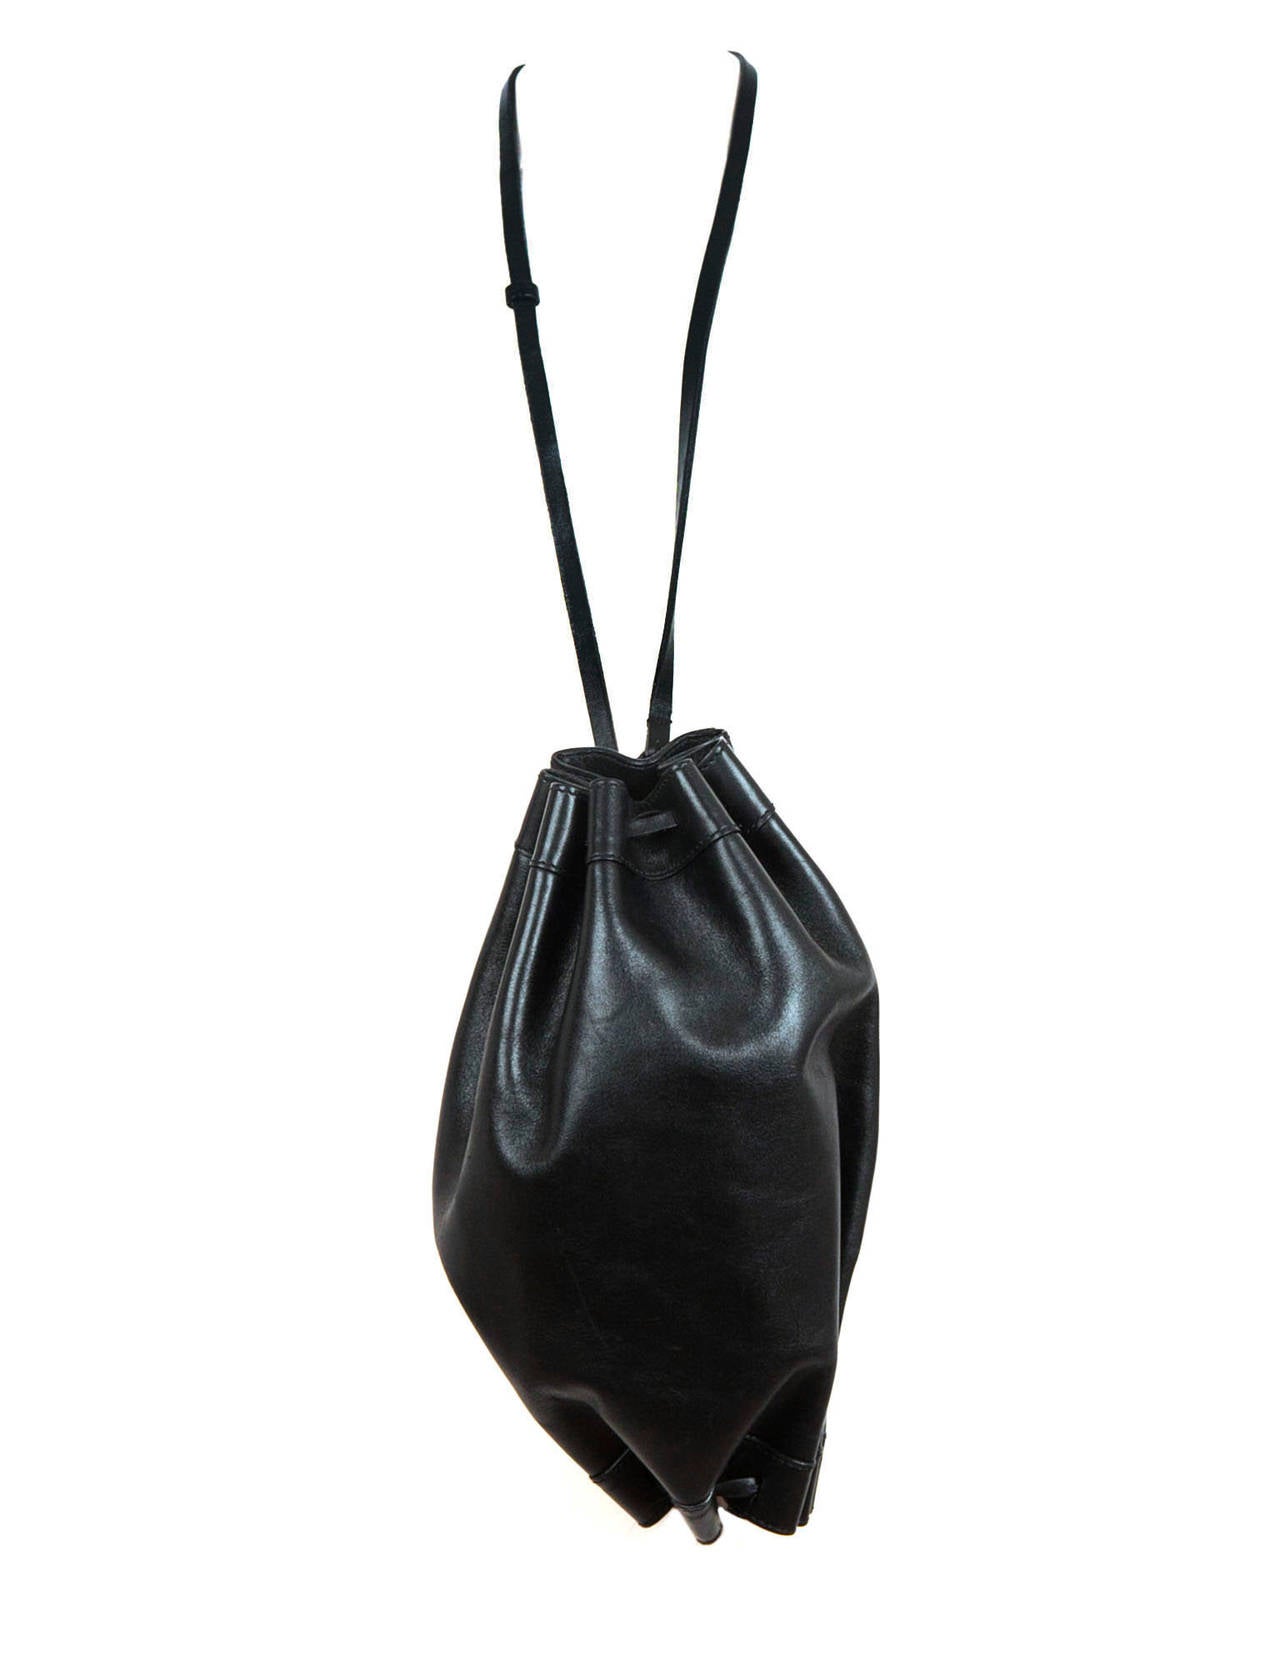 Vintage Helmut Lang football shaped bag in black leather with shoulder strap. Bag has football shape with leather cord pulled to give pleated detail all around bag. There is a long thin leather strap, fully lined in black acetate, one pocket with